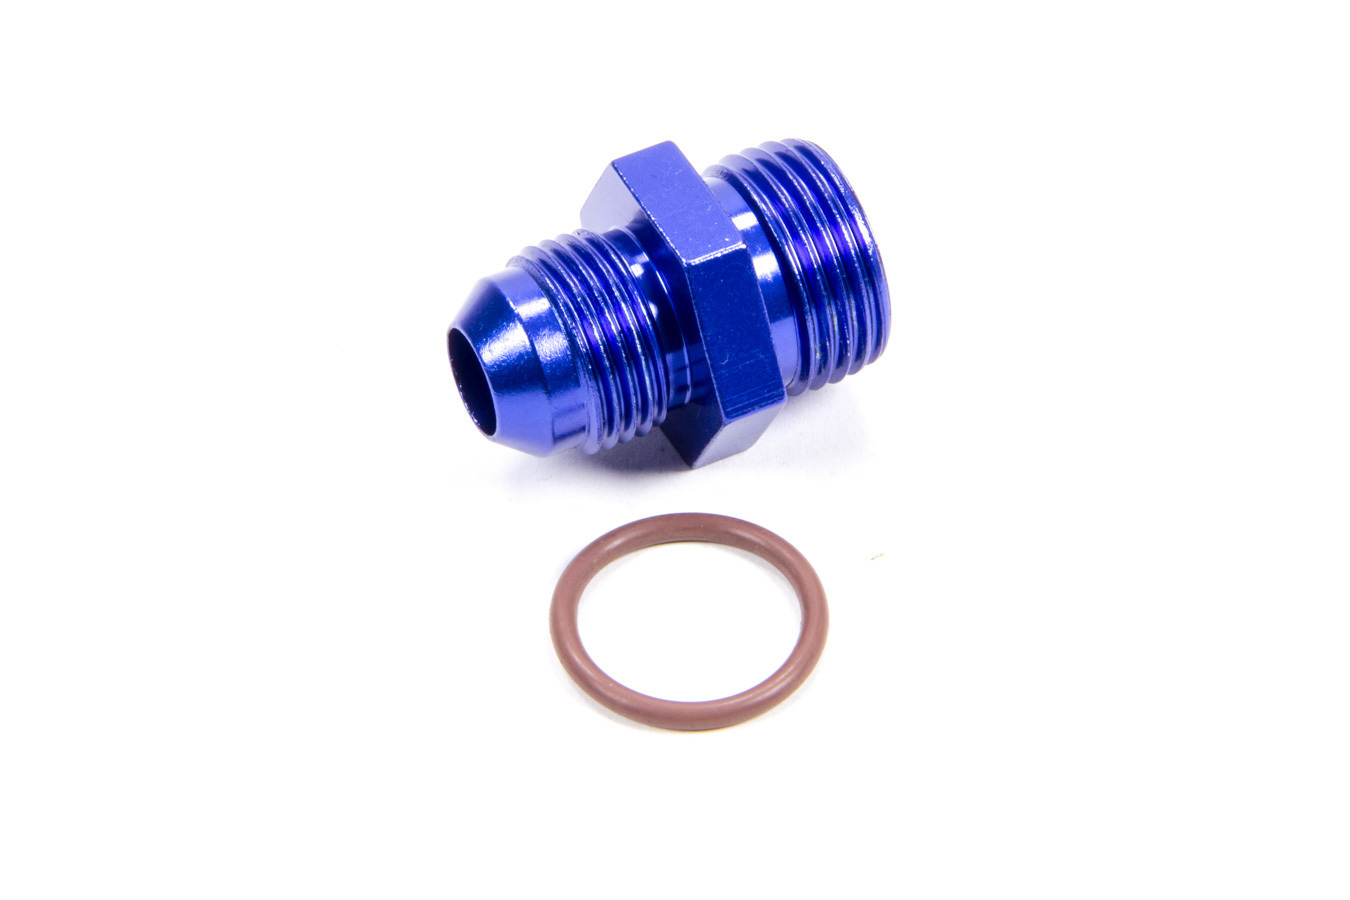 Fragola 495104 Fitting, Adapter, Straight, 8 AN Male to 10 AN Male O-Ring, Aluminum, Blue Anodized, Each